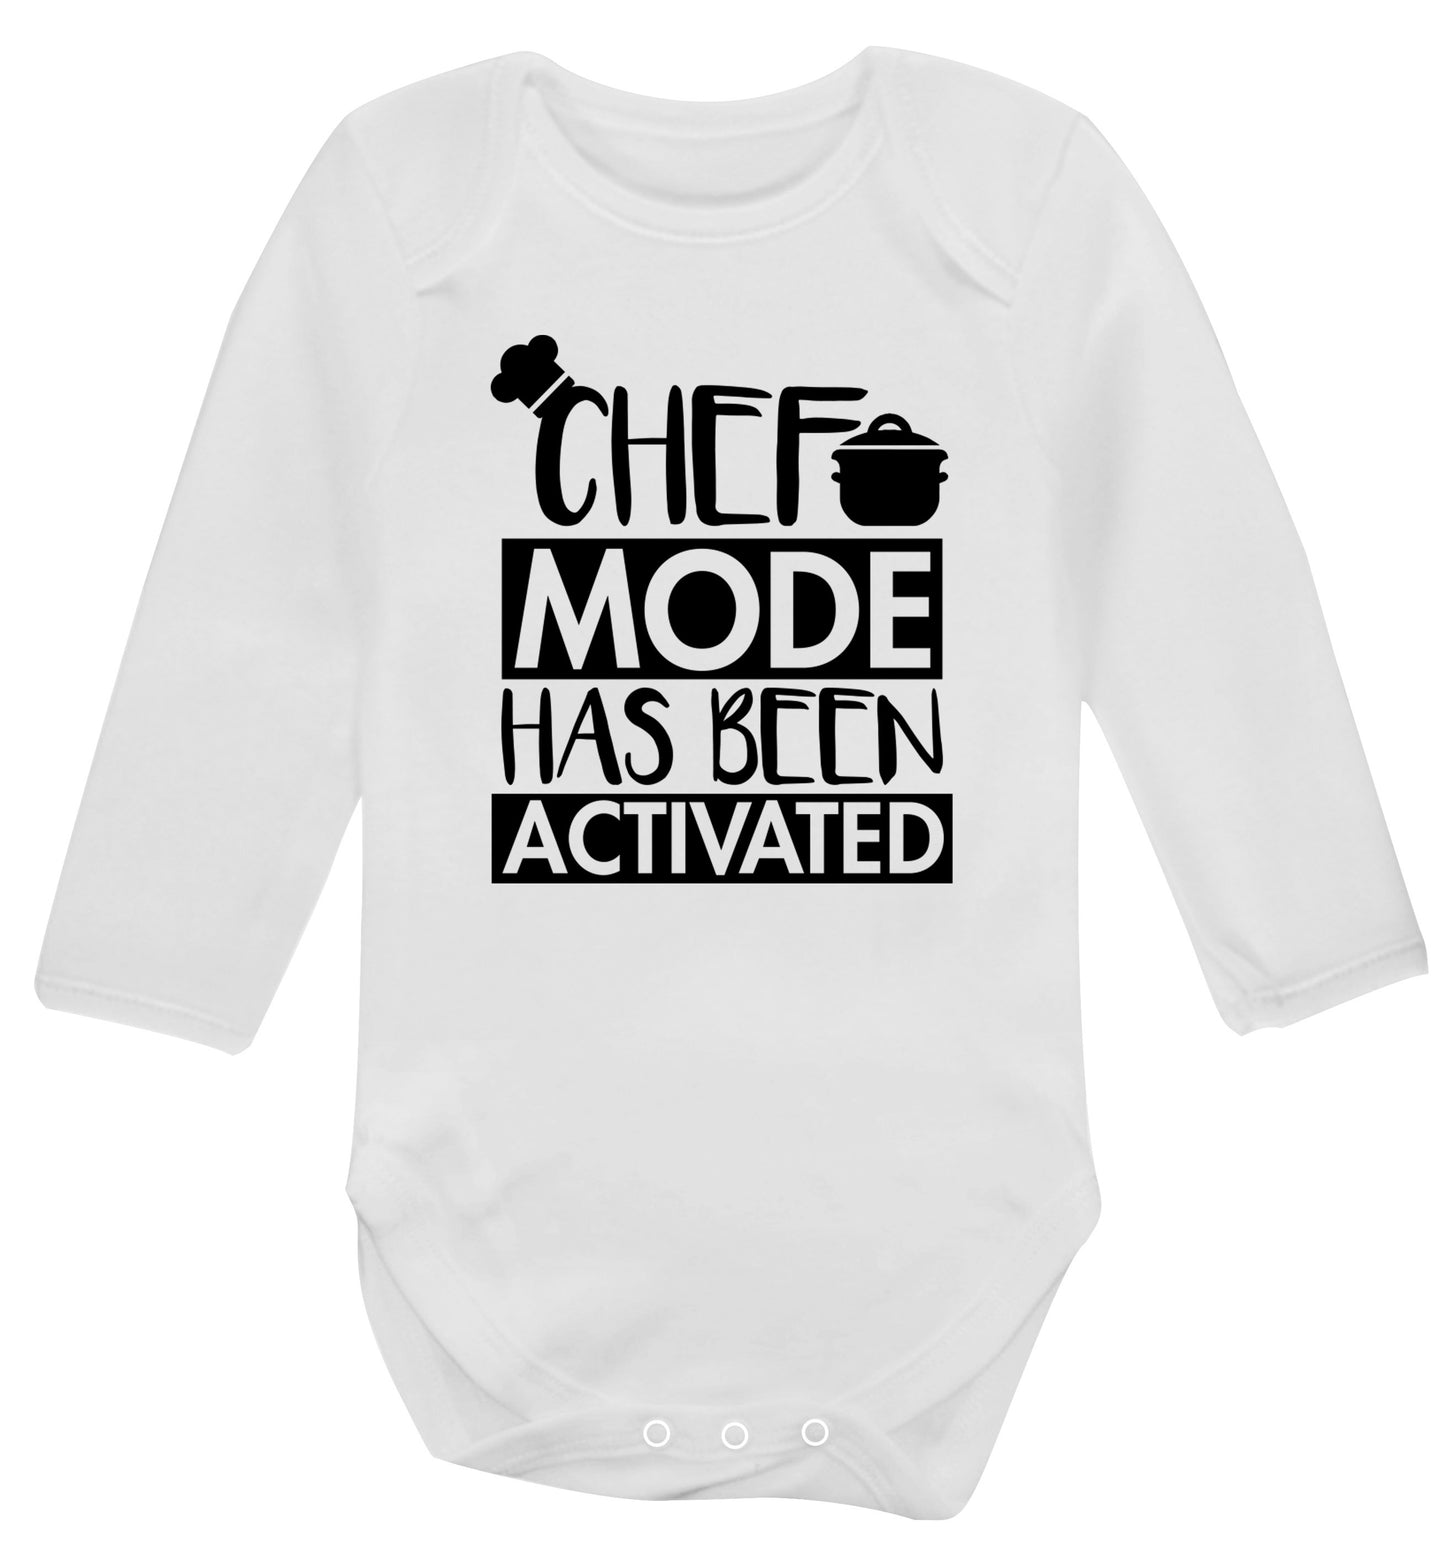 Chef mode has been activated Baby Vest long sleeved white 6-12 months